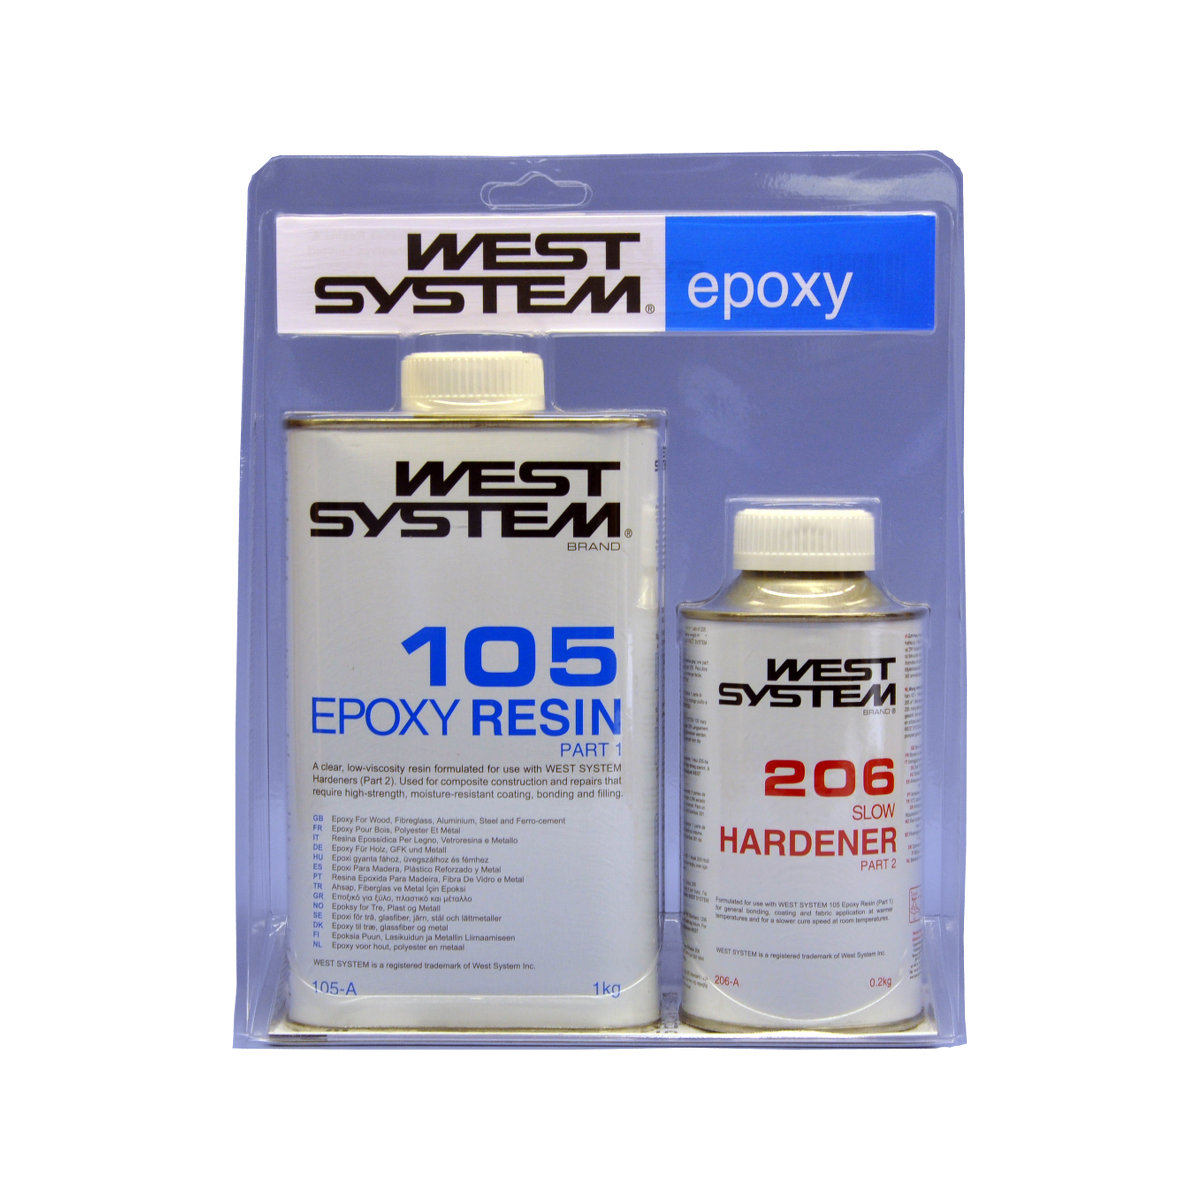 West System A-Pack Epoxy met langzame verharder 105-206A - 1.2kg